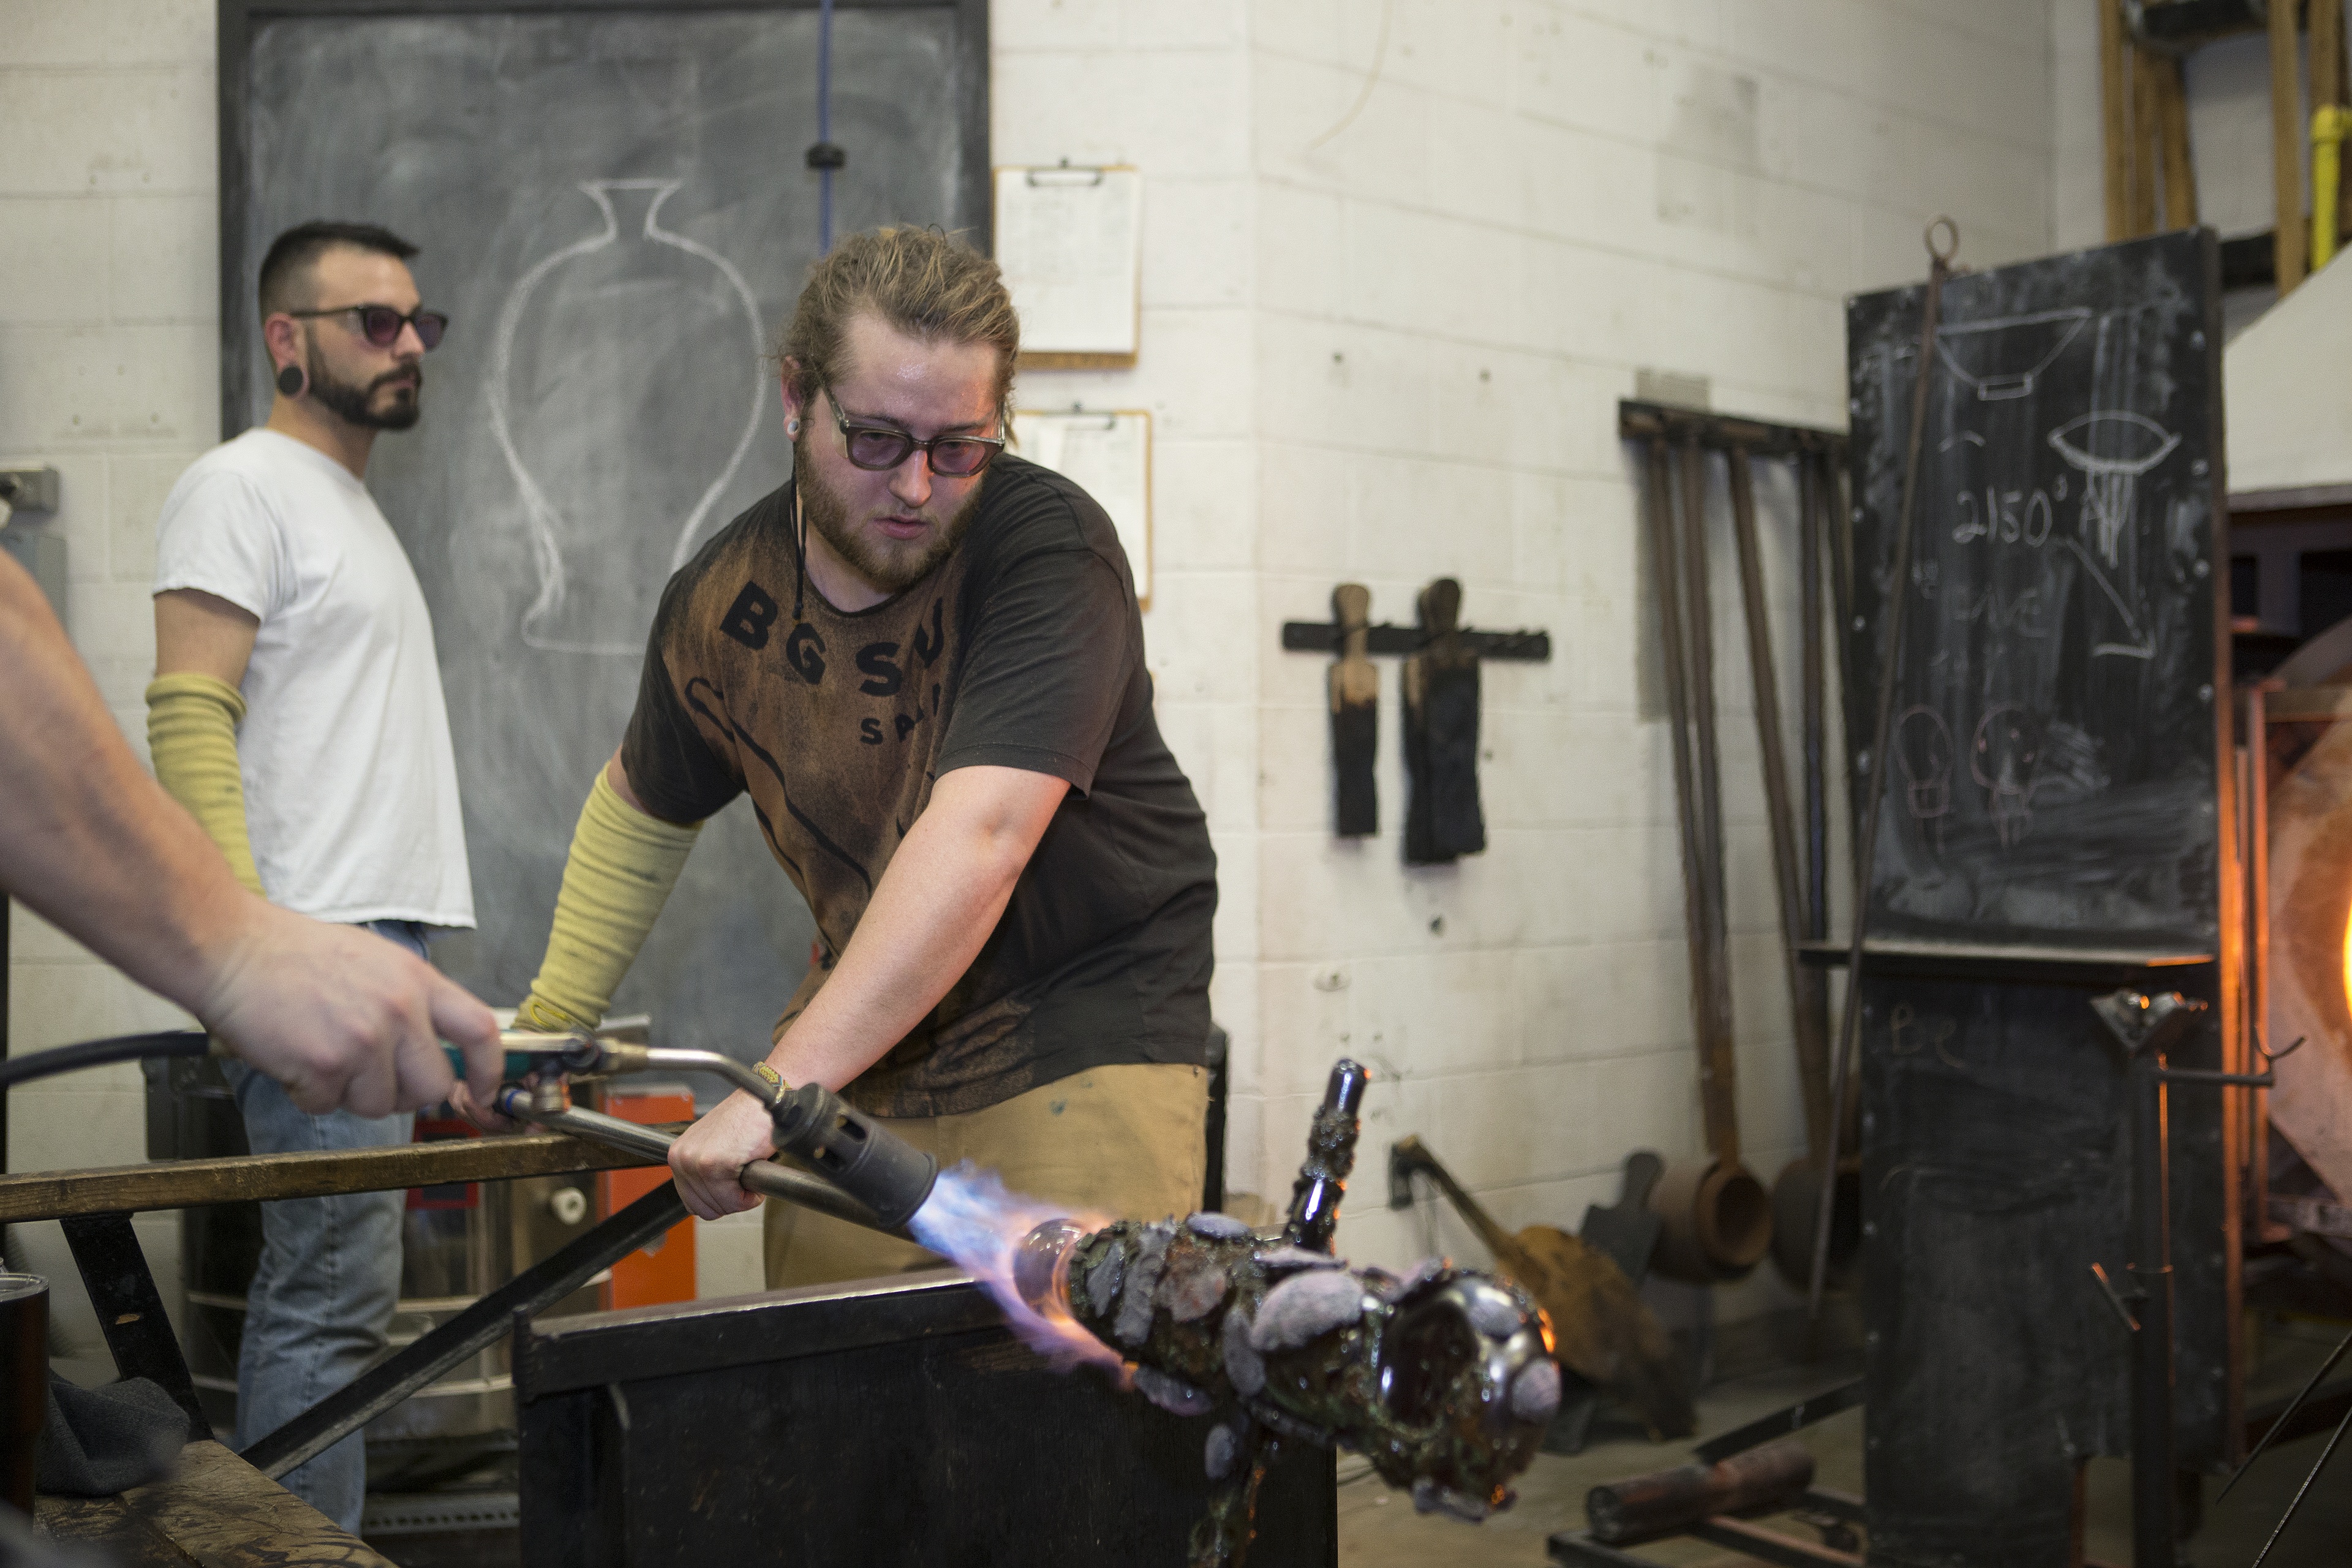 BGSU studio art degree offers multidisciplinary 2D and 3D art studies in a BFA or BA degree at one of the largest art programs in a public Ohio university.